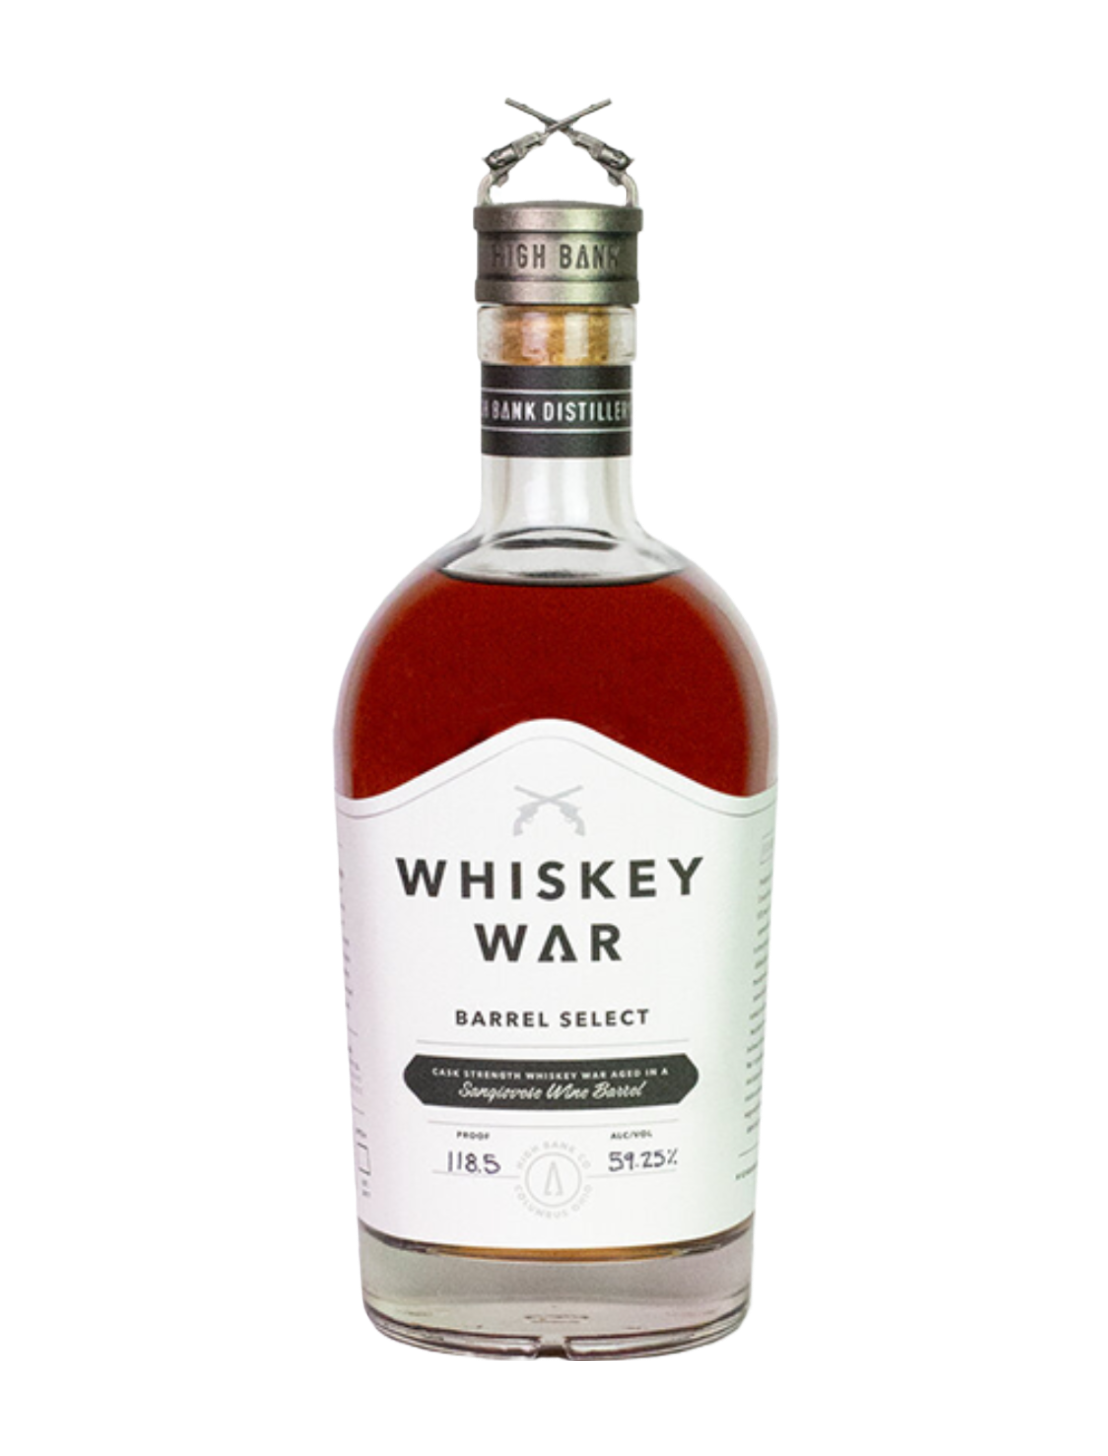 A fancy bottle of Whiskey War Barrel Select in front of a plain white background